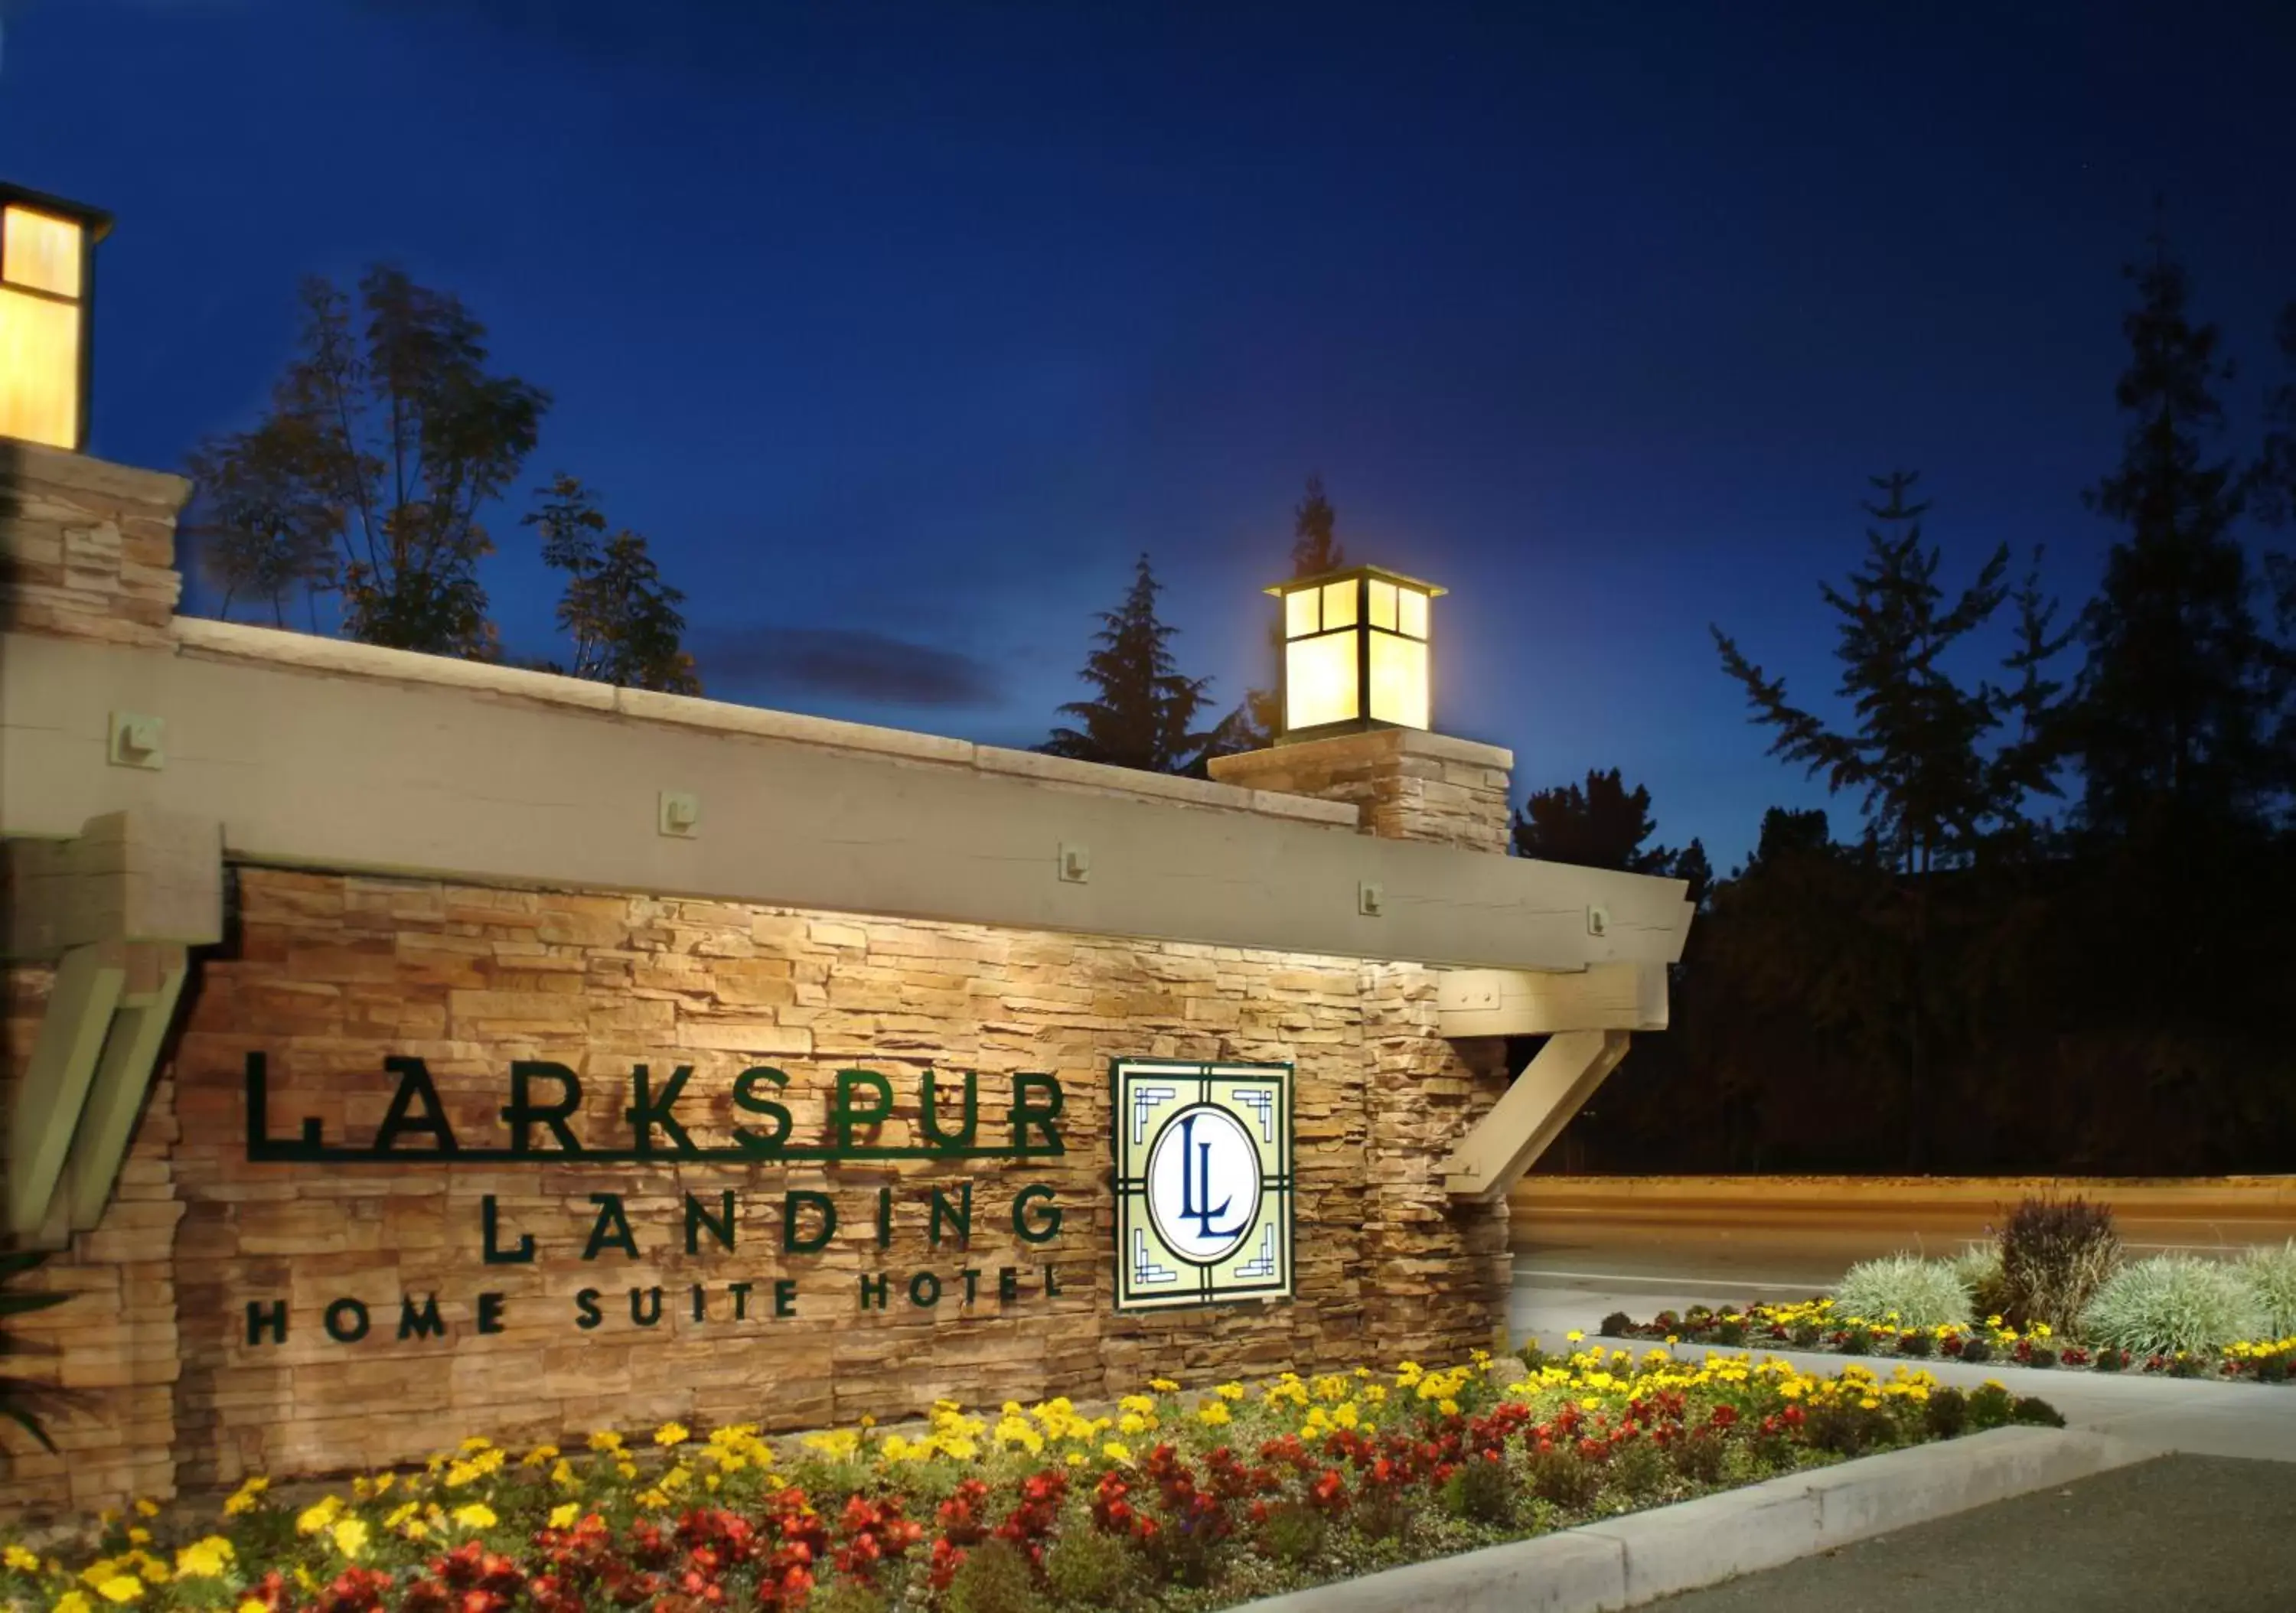 Property logo or sign, Property Building in Larkspur Landing Hillsboro-An All-Suite Hotel